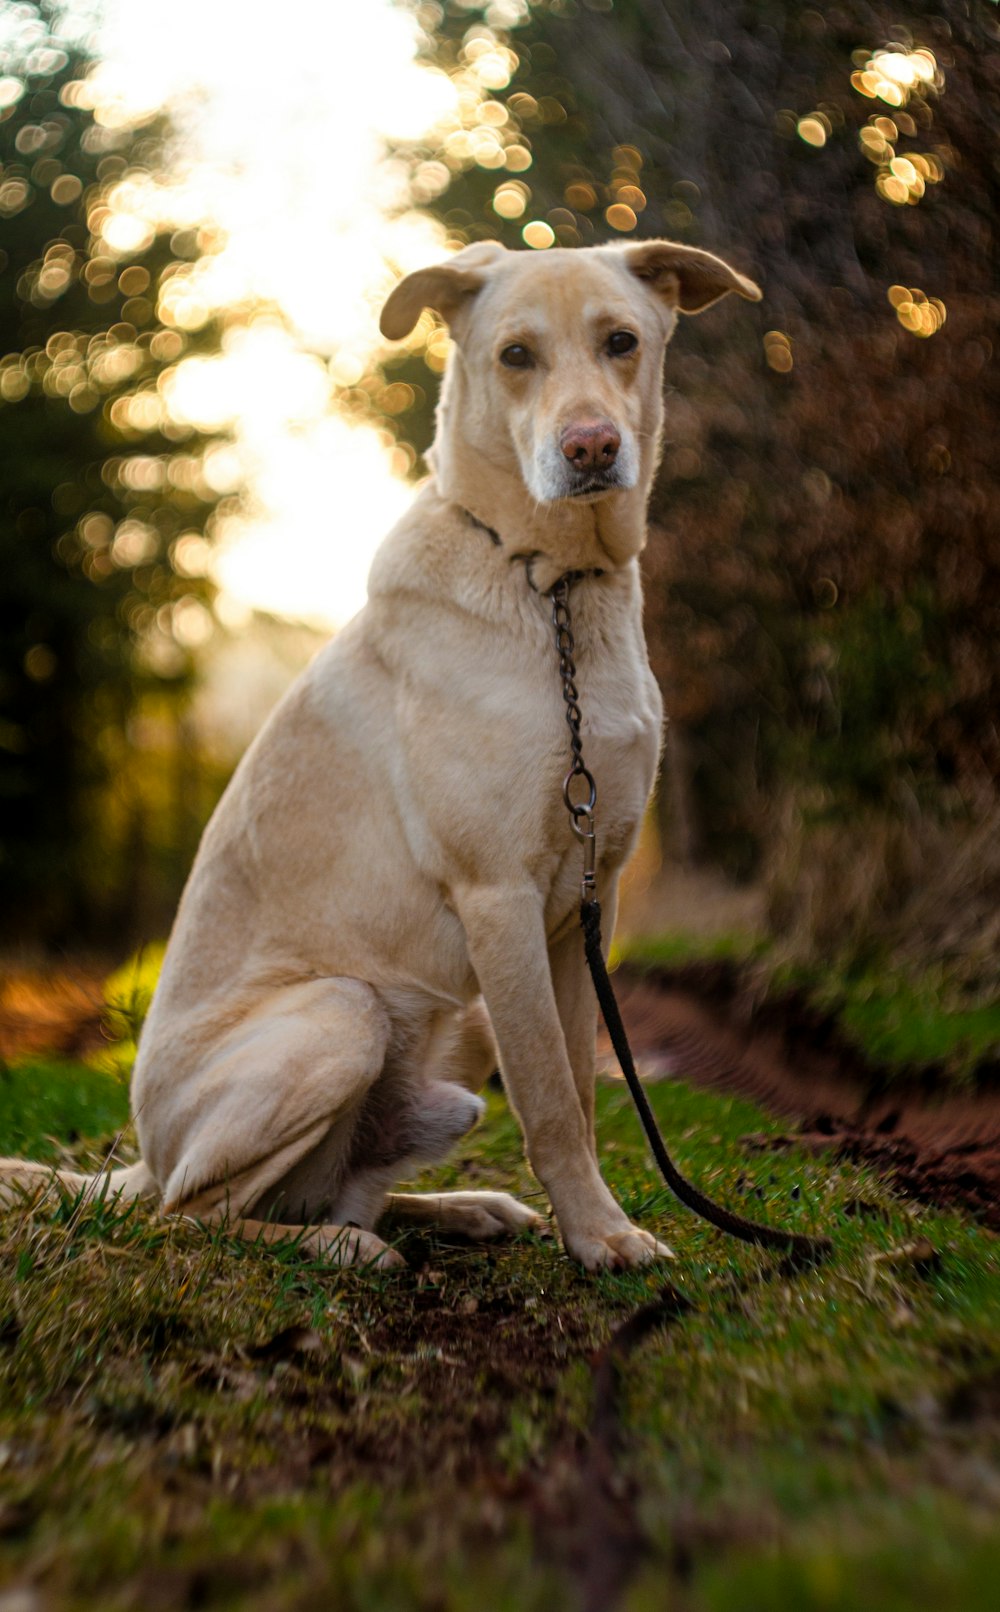 yellow labrador retriever with black leash sitting on grass field during daytime